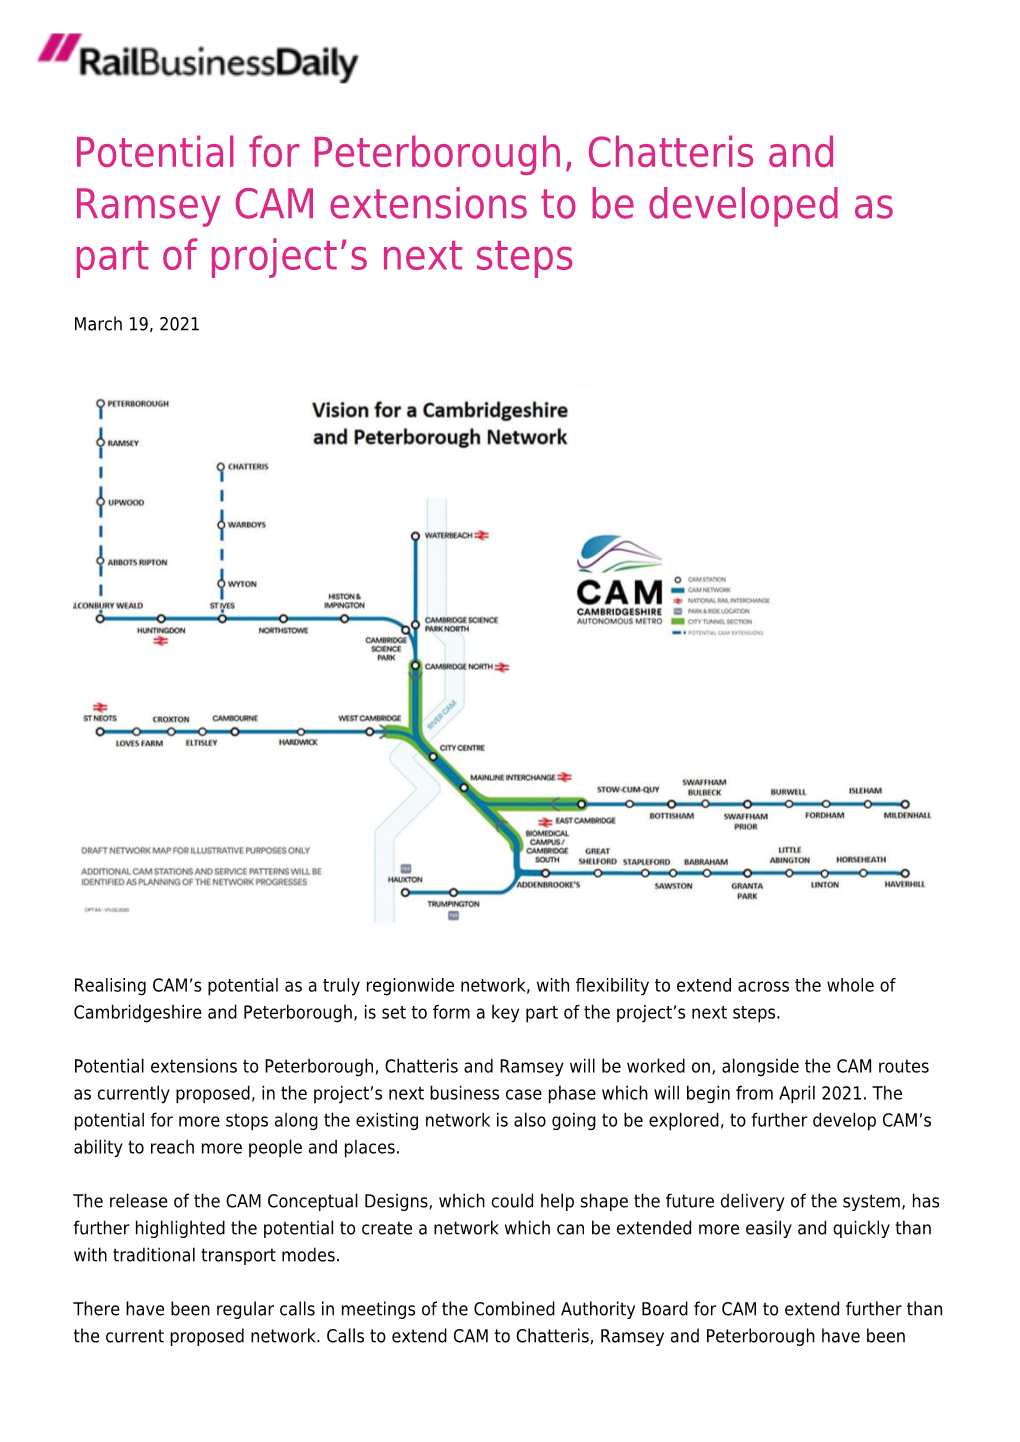 Potential for Peterborough, Chatteris and Ramsey CAM Extensions to Be Developed As Part of Project’S Next Steps